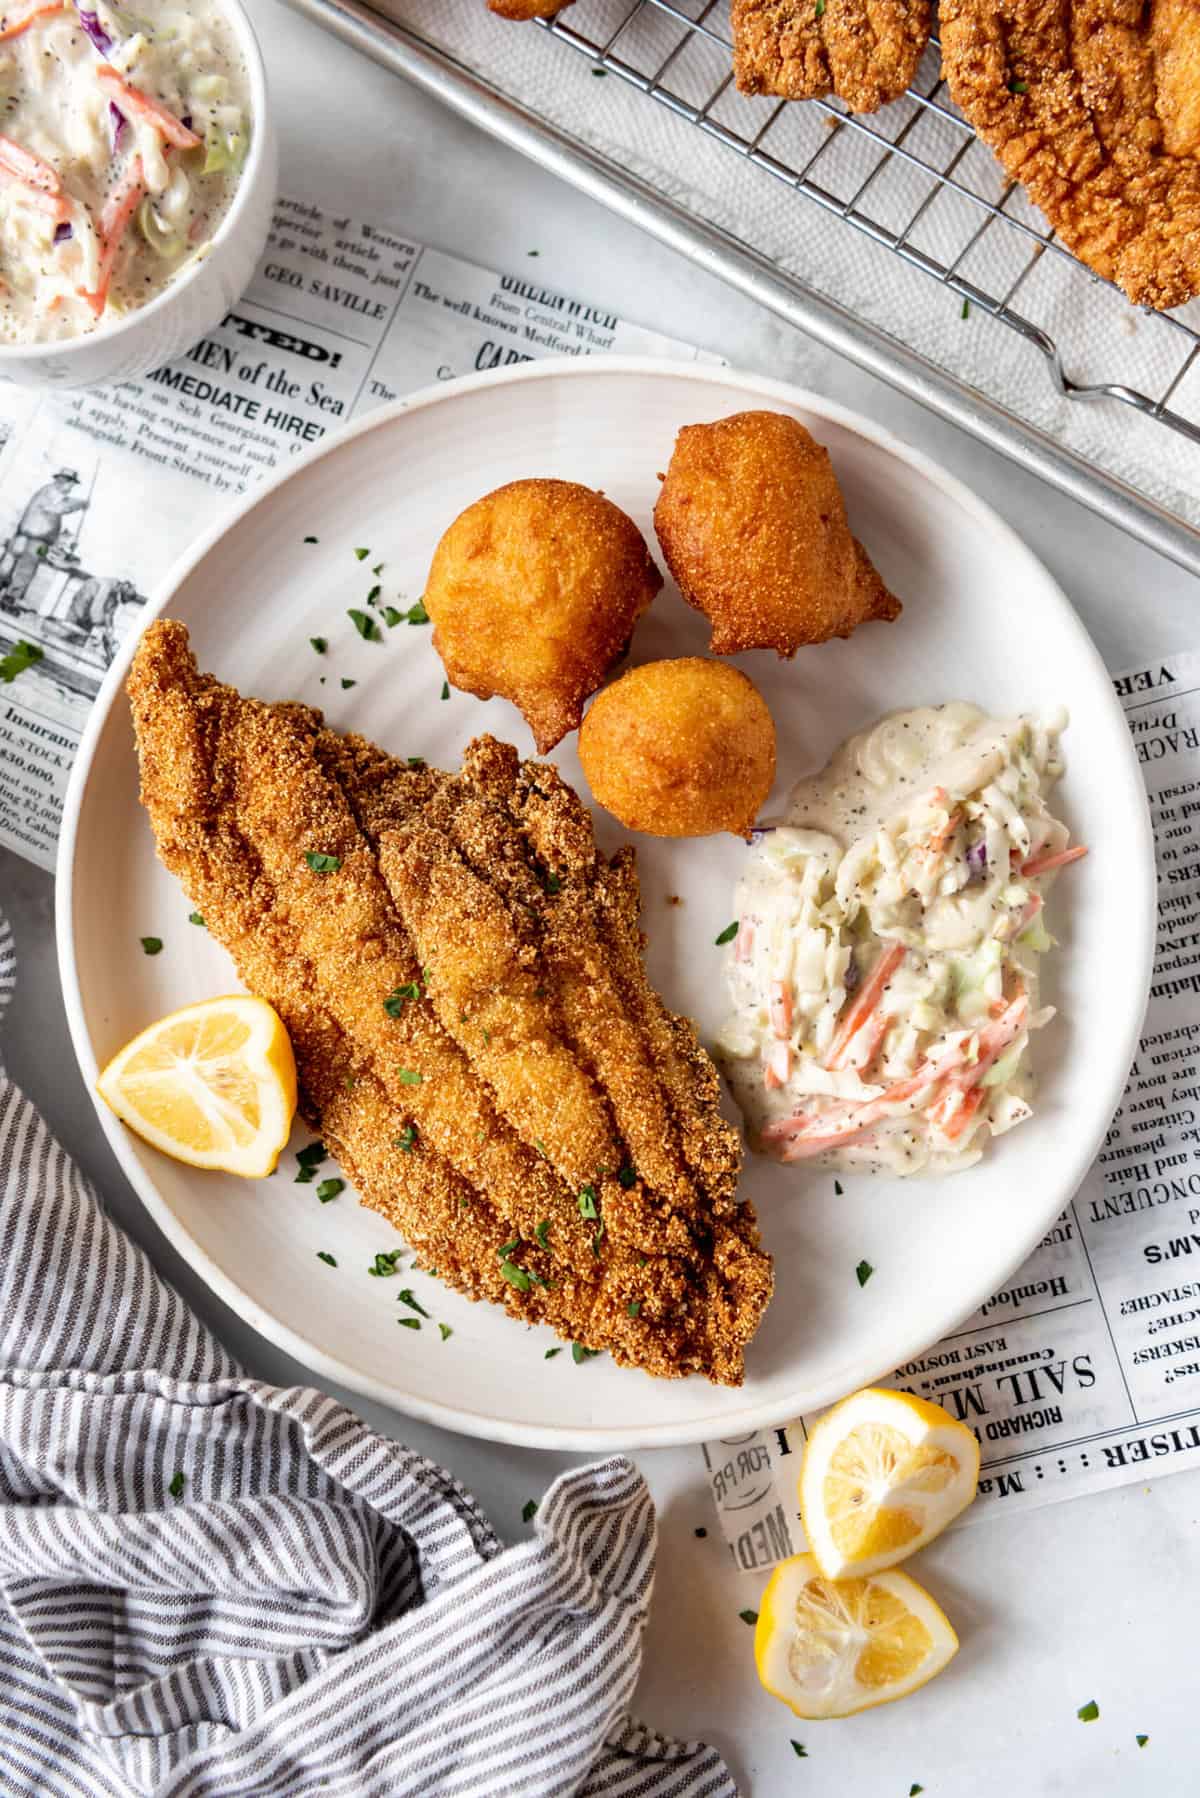 A piece of fried catfish on a white plate with hush puppies, coleslaw, and lemon wedges.